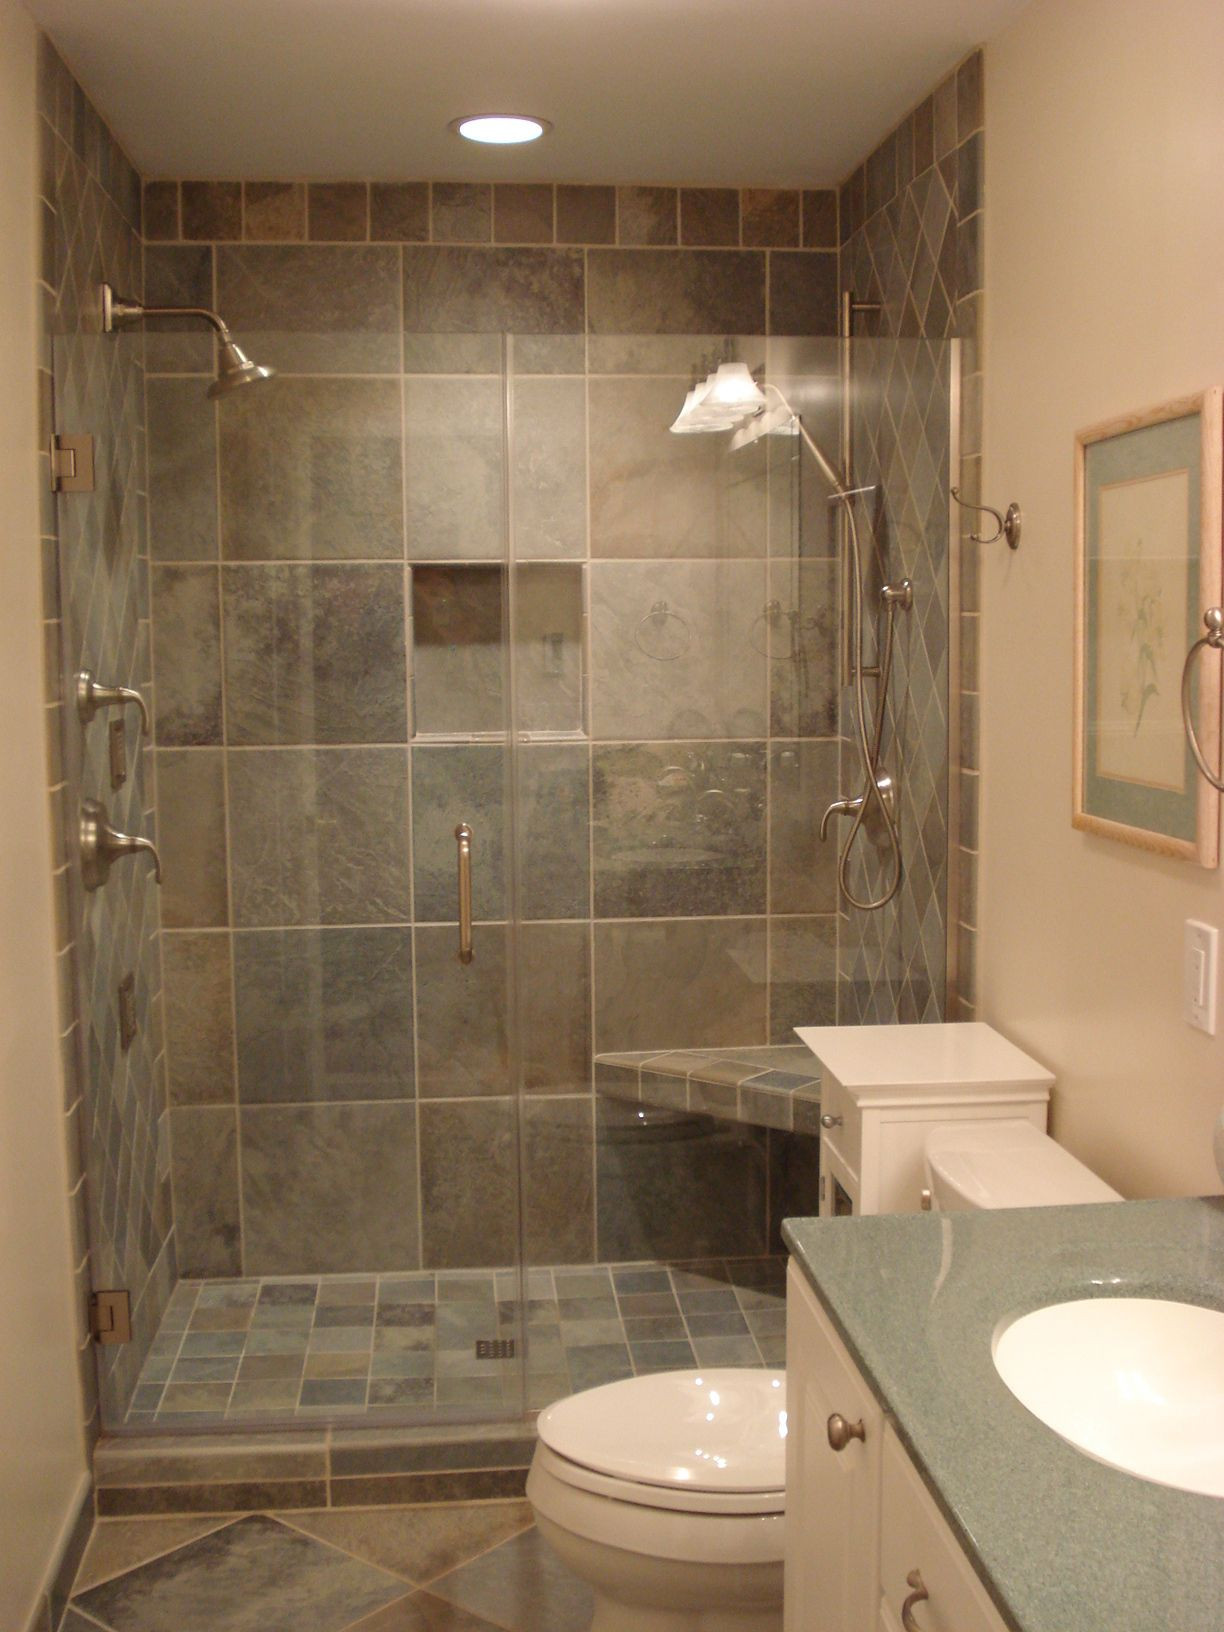 Remodel Bathroom Showers
 Bathroom and Shower Remodel Ideas and Tricks for a Limited